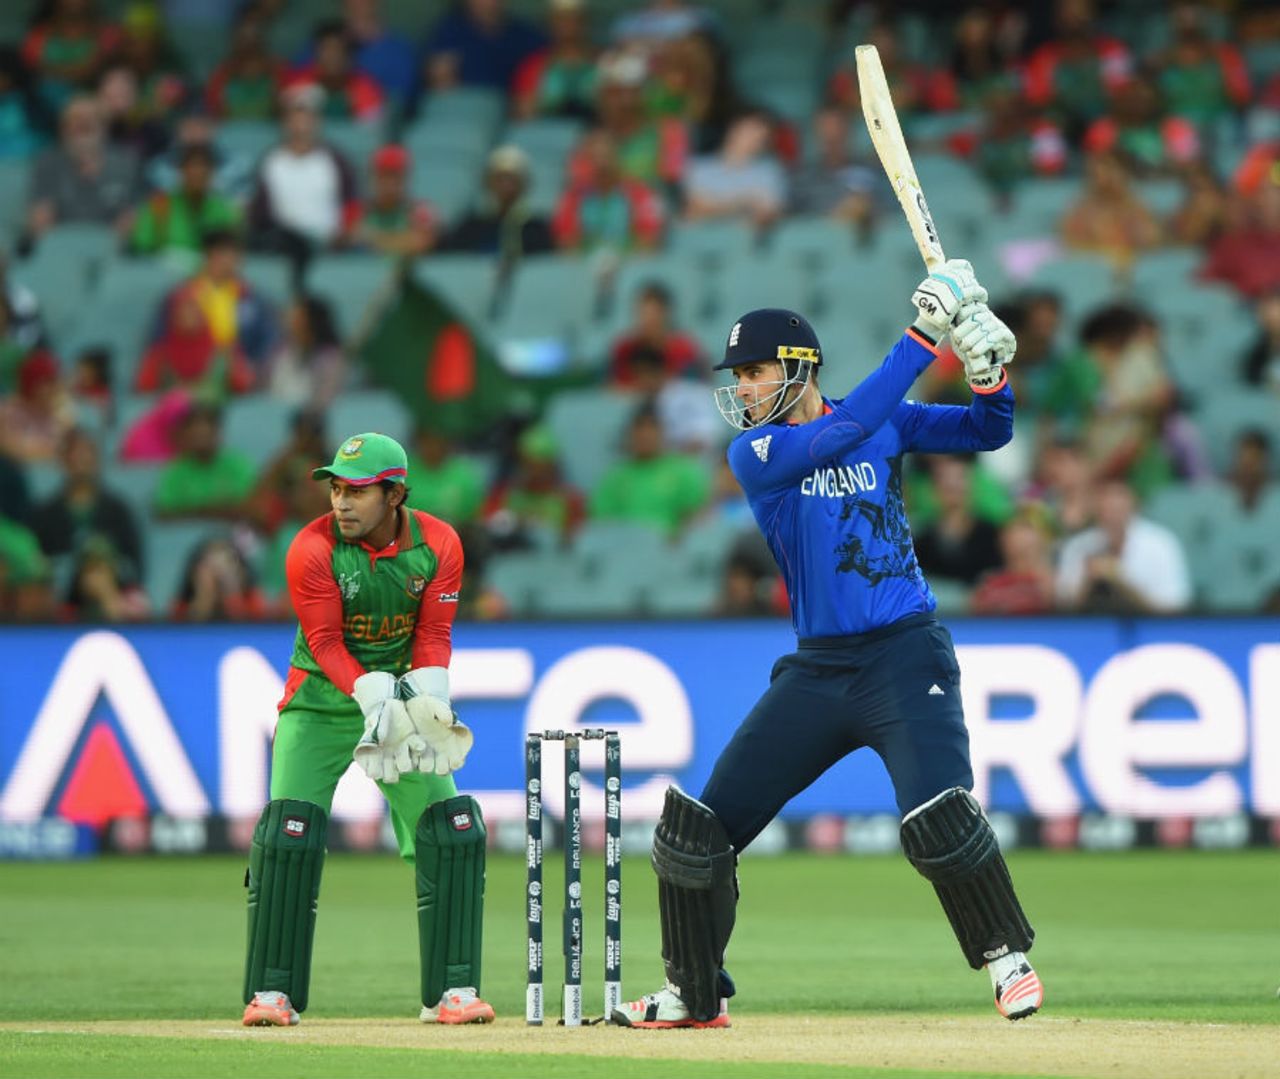 Alex Hales plays off the back foot, England v Bangladesh, World Cup 2015, Group A, Adelaide, March 9, 2015